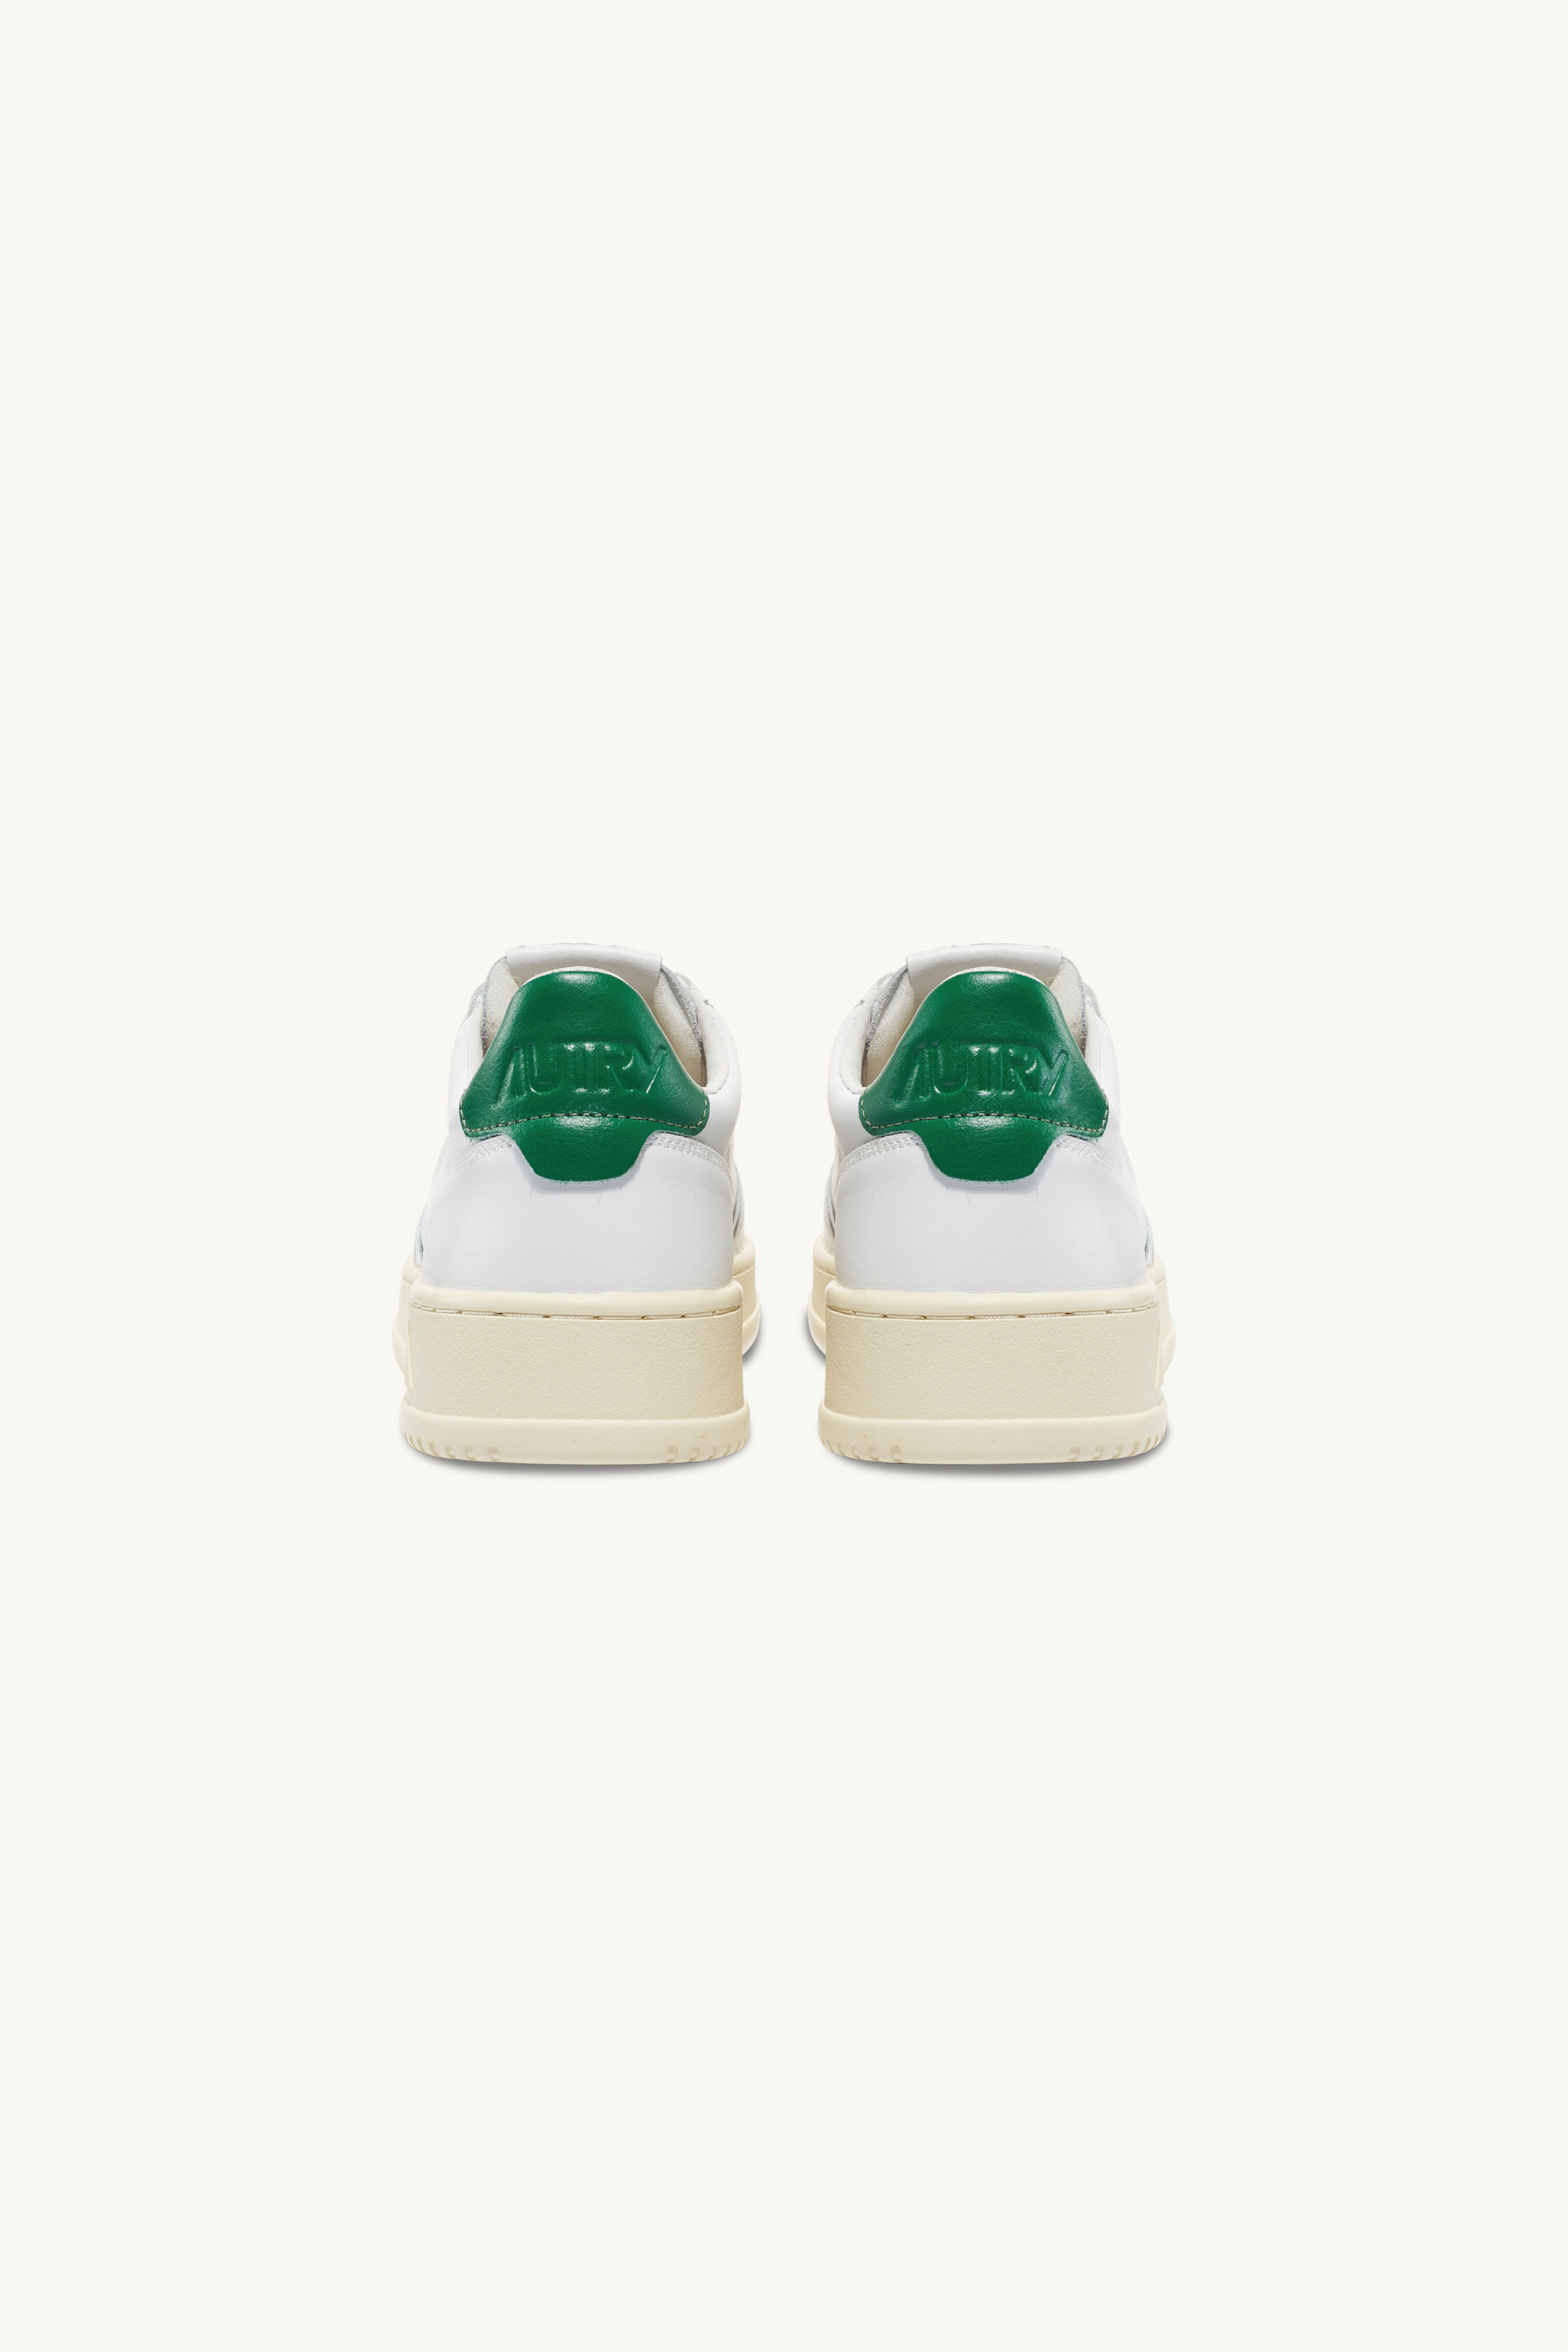 AULW-LL20 - MEDALIST LOW SNEAKERS IN LEATHER WHITE AND GREEN